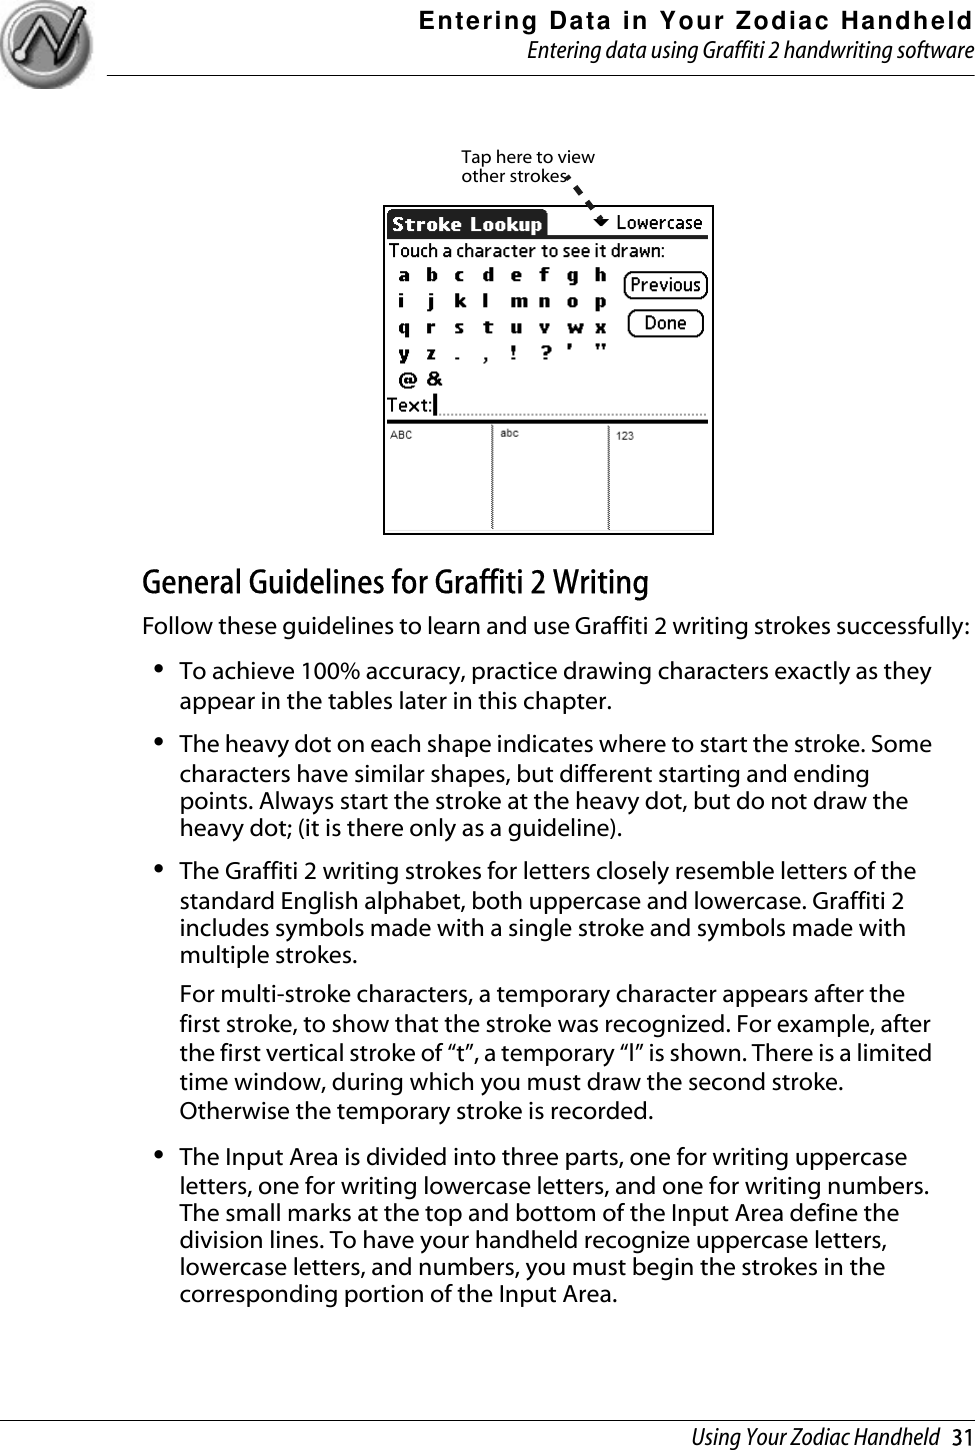 Entering Data in Your Zodiac HandheldEntering data using Graffiti 2 handwriting softwareUsing Your Zodiac Handheld   31General Guidelines for Graffiti 2 WritingFollow these guidelines to learn and use Graffiti 2 writing strokes successfully: •To achieve 100% accuracy, practice drawing characters exactly as they appear in the tables later in this chapter.•The heavy dot on each shape indicates where to start the stroke. Some characters have similar shapes, but different starting and ending points. Always start the stroke at the heavy dot, but do not draw the heavy dot; (it is there only as a guideline). •The Graffiti 2 writing strokes for letters closely resemble letters of the standard English alphabet, both uppercase and lowercase. Graffiti 2 includes symbols made with a single stroke and symbols made with multiple strokes.For multi-stroke characters, a temporary character appears after the first stroke, to show that the stroke was recognized. For example, after the first vertical stroke of “t”, a temporary “l” is shown. There is a limited time window, during which you must draw the second stroke. Otherwise the temporary stroke is recorded.•The Input Area is divided into three parts, one for writing uppercase letters, one for writing lowercase letters, and one for writing numbers. The small marks at the top and bottom of the Input Area define the division lines. To have your handheld recognize uppercase letters, lowercase letters, and numbers, you must begin the strokes in the corresponding portion of the Input Area.Tap here to view other strokes